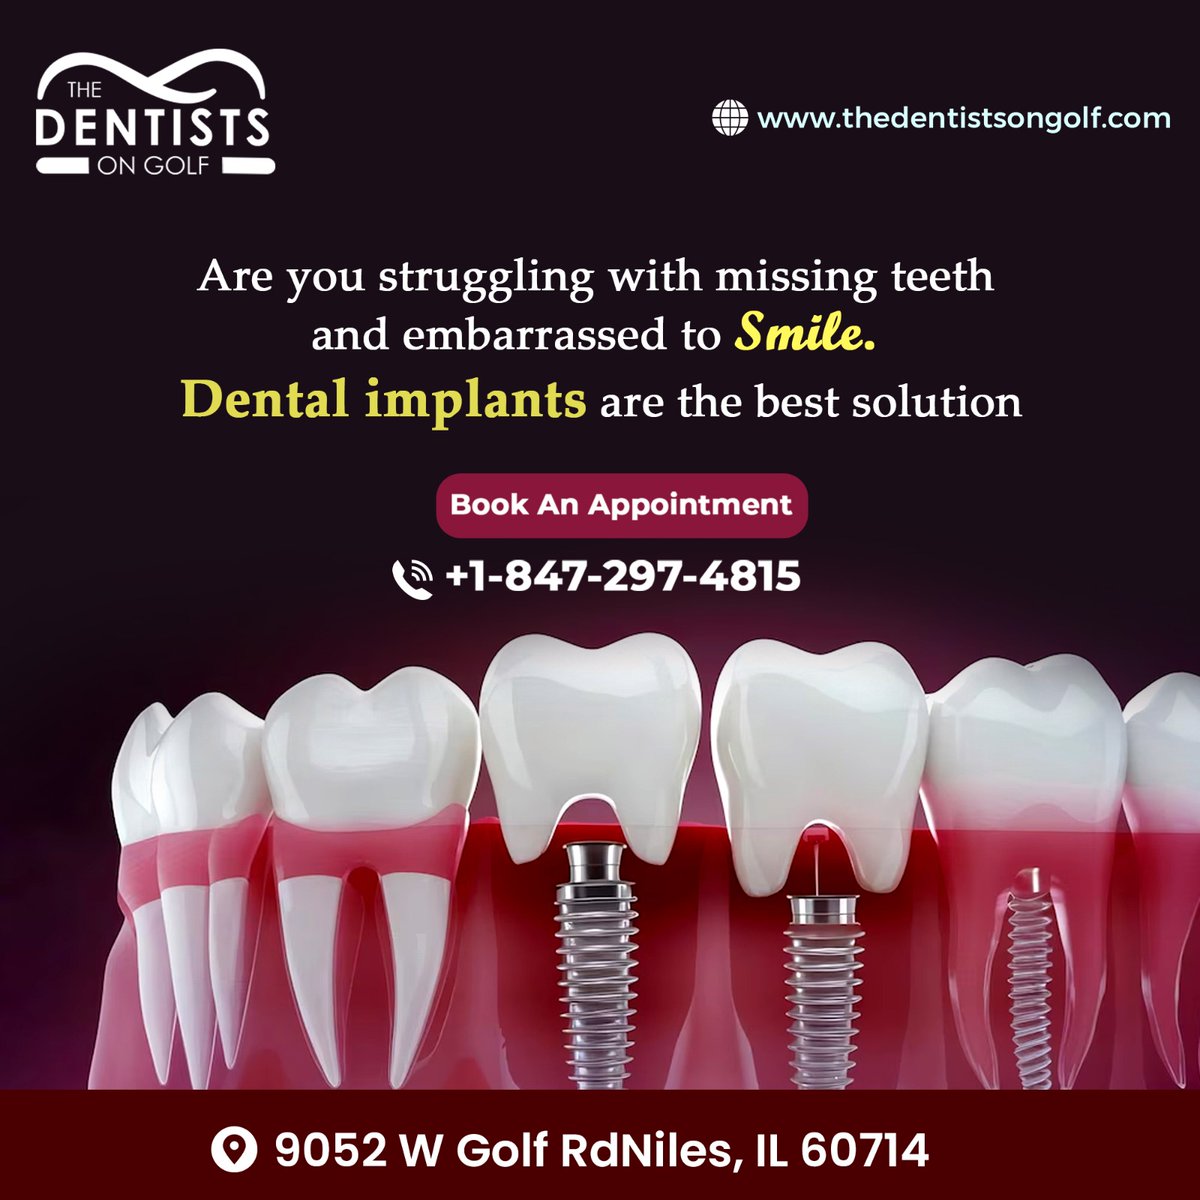 Welcome a confident smile with dental implants! Find a lasting solution for missing teeth and rediscover your natural beauty.
.
For Appointments, contact us at 847-297-4815 or
Visit: thedentistsongolf.com 
.
#Dentalimplants #cosmeticdentistry #dentalcleaning 
#dentaltreatment